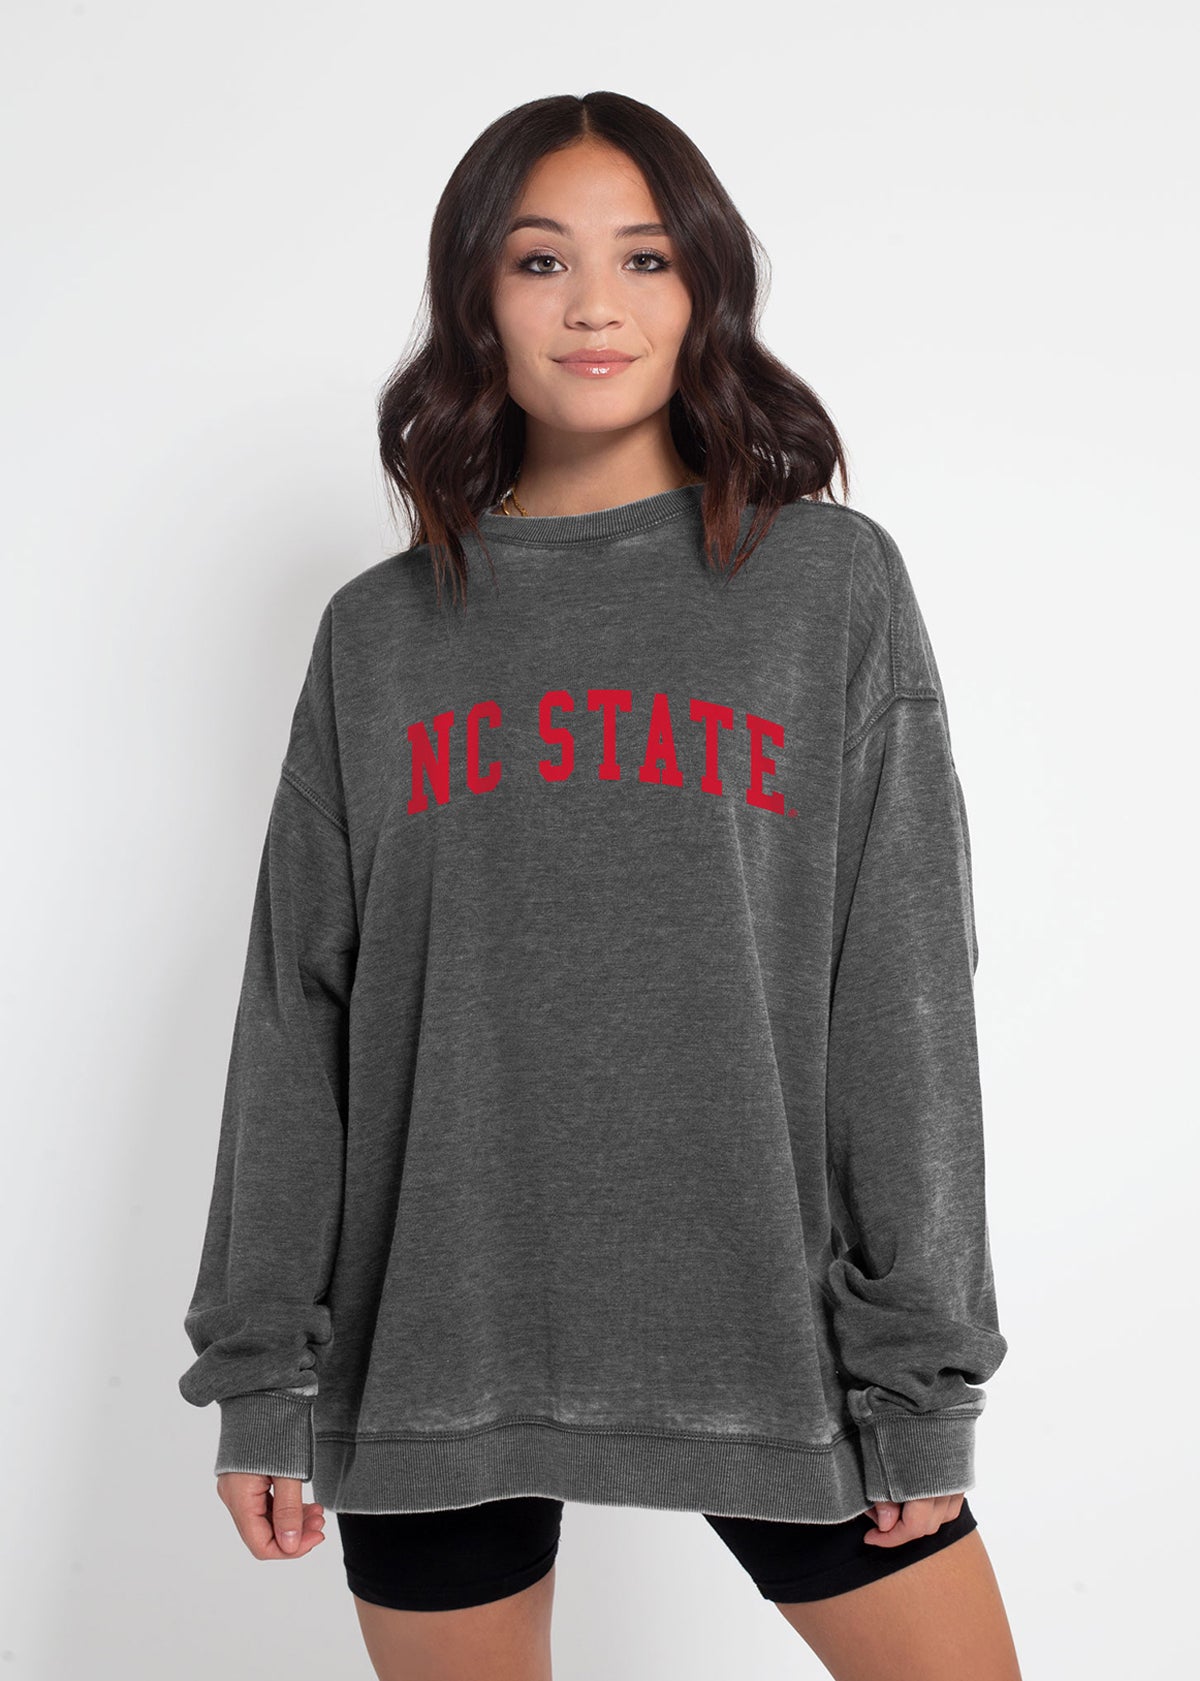 Campus Crew Sweatshirt NC State Wolfpack in Charcoal